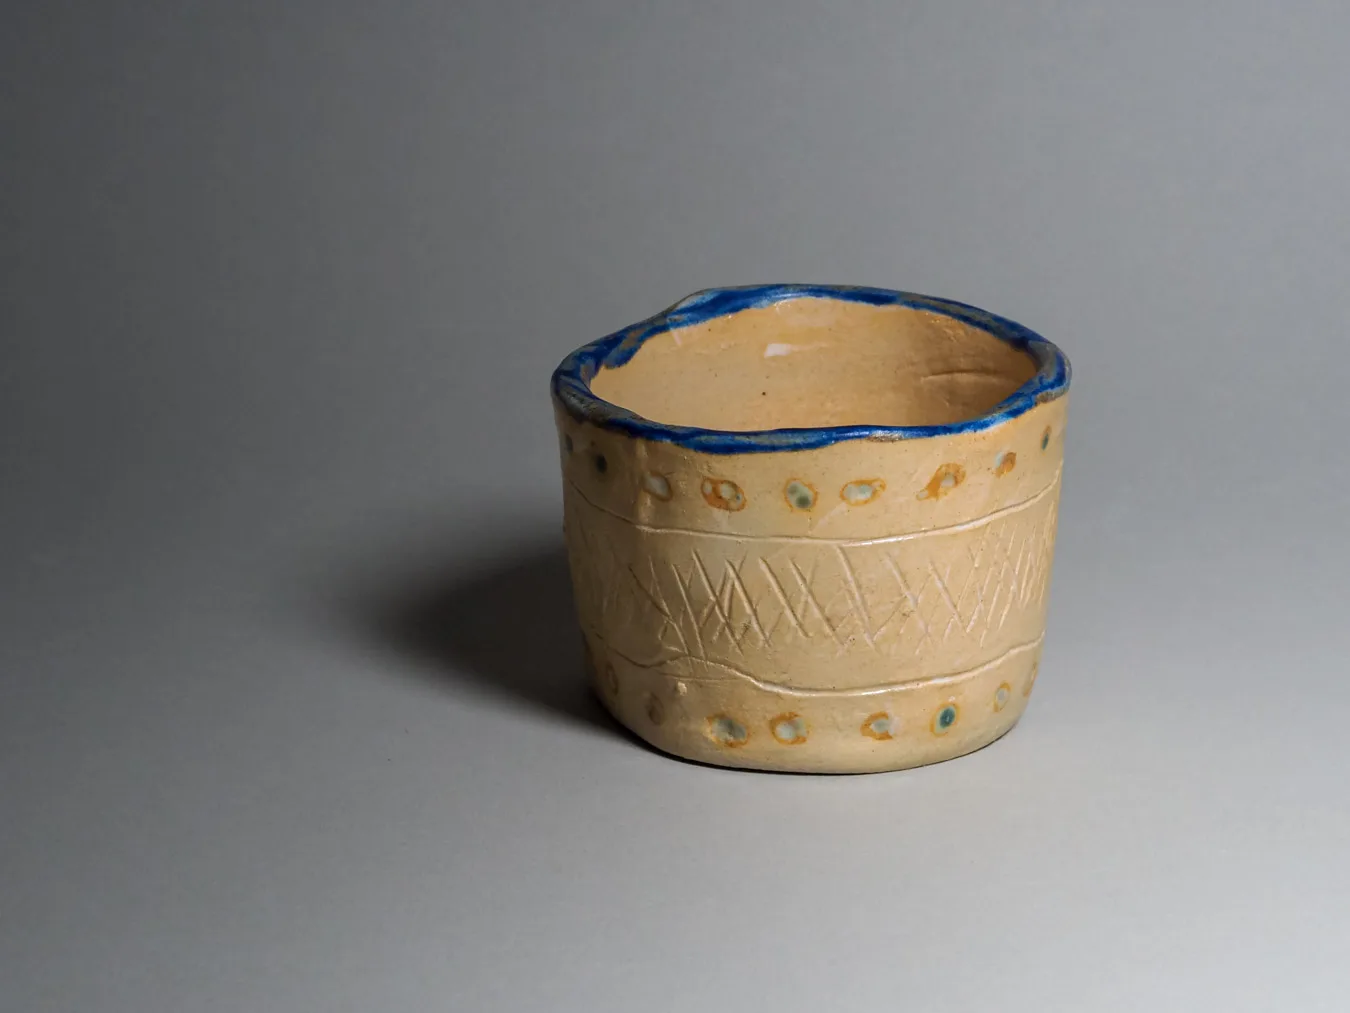 My first ceramic cup made at 2009